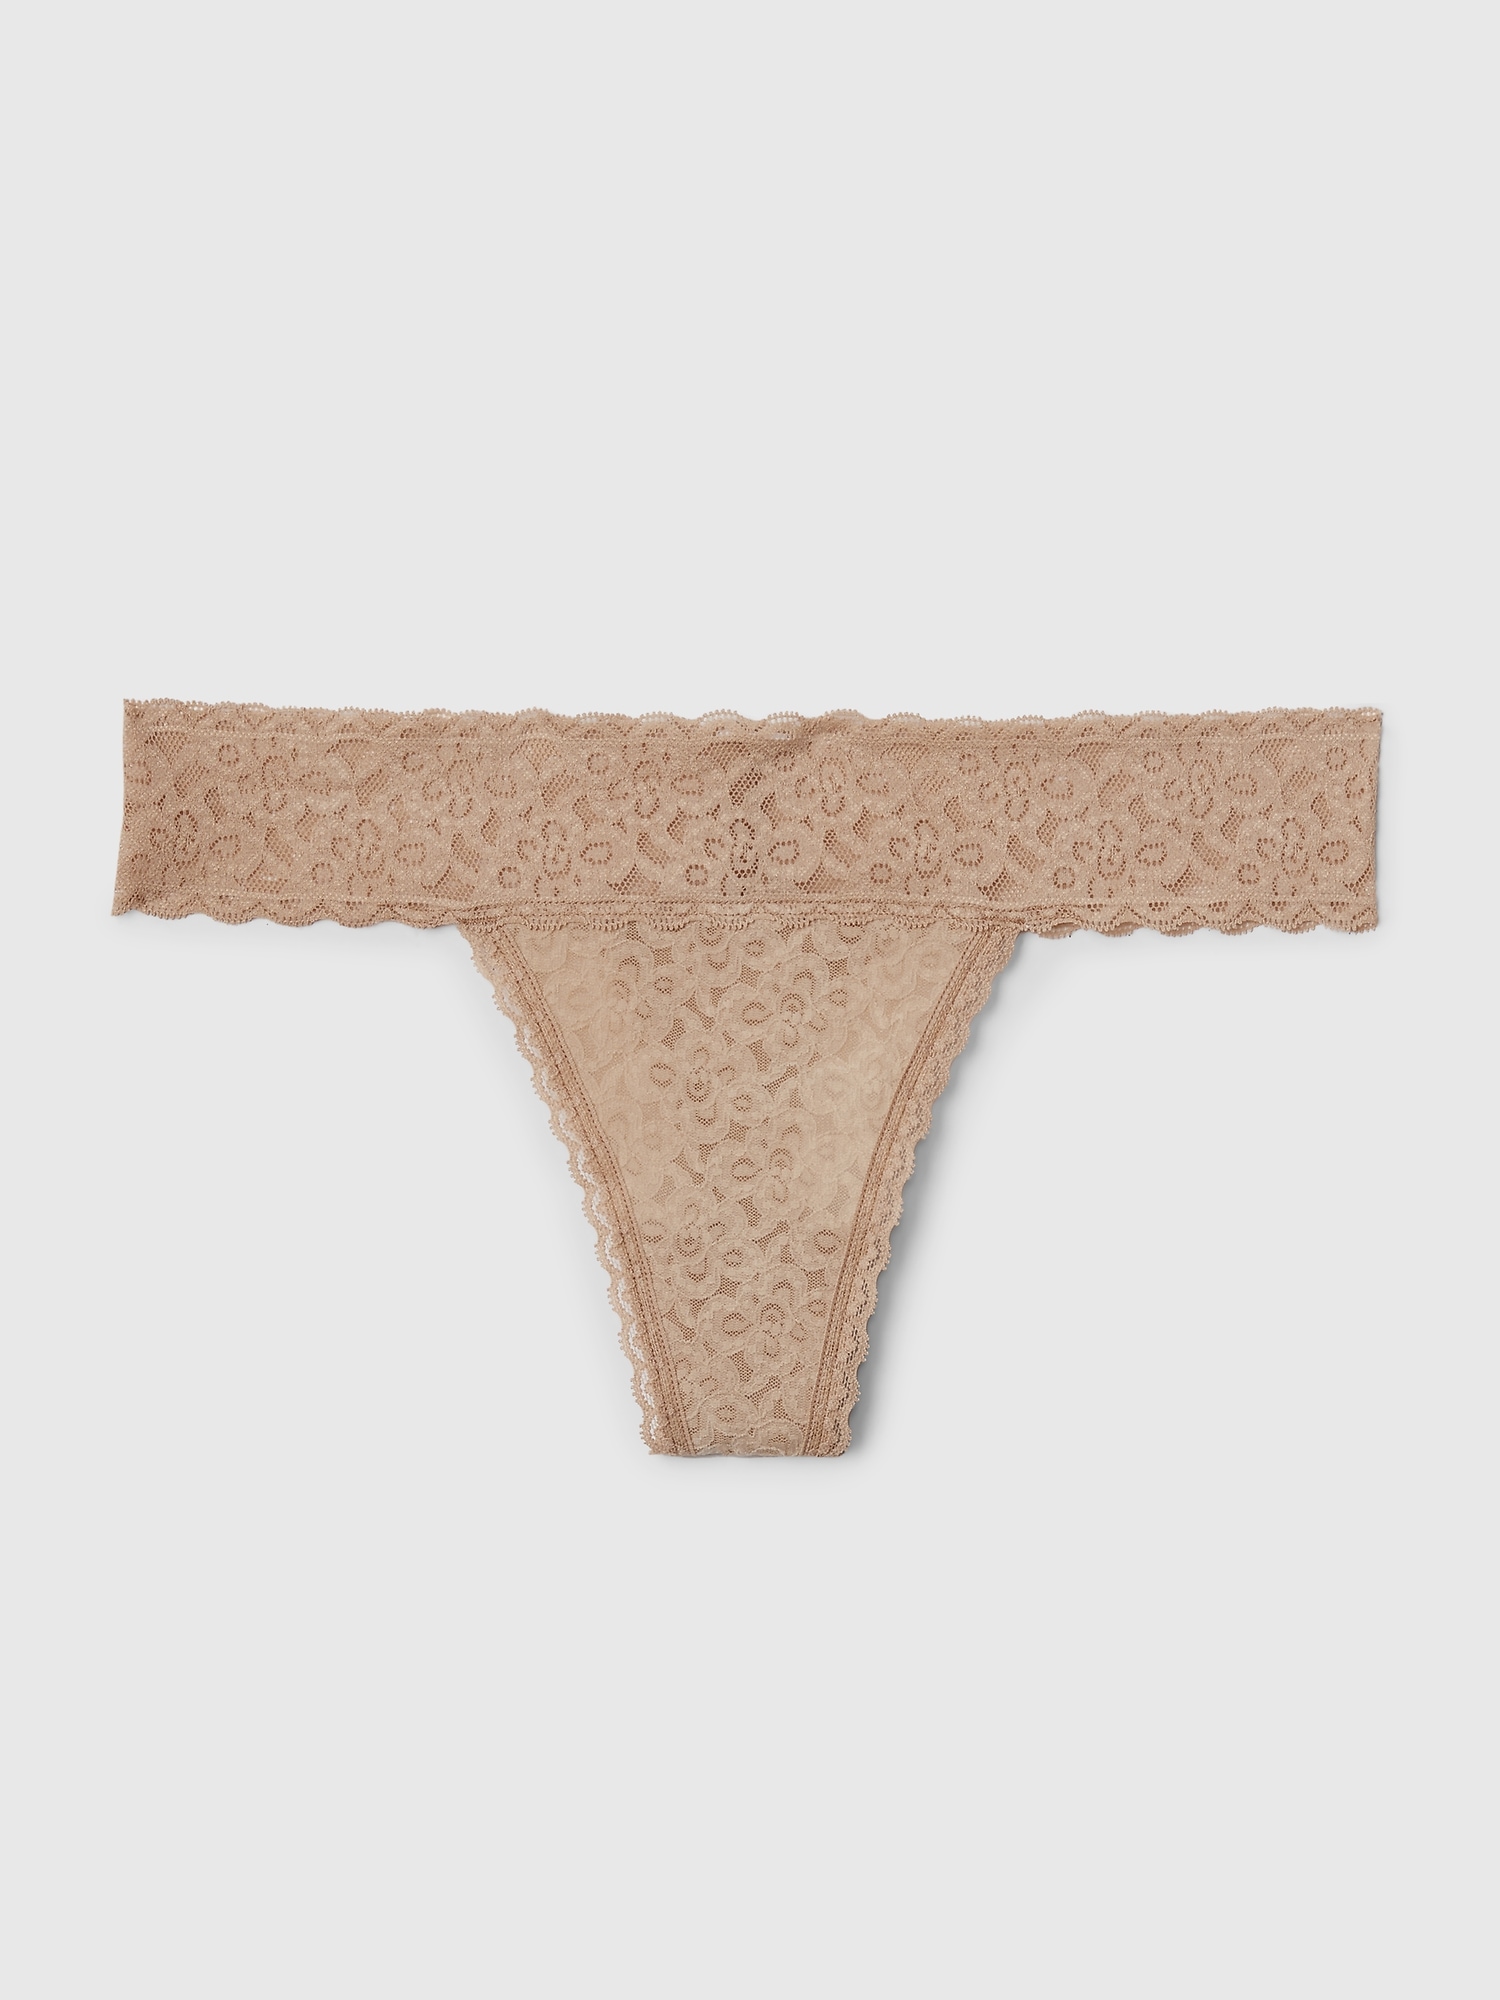 NWT LOVE By GAP Body Breathe Thong, Belle Pink, Size XS, $12.50, #421102